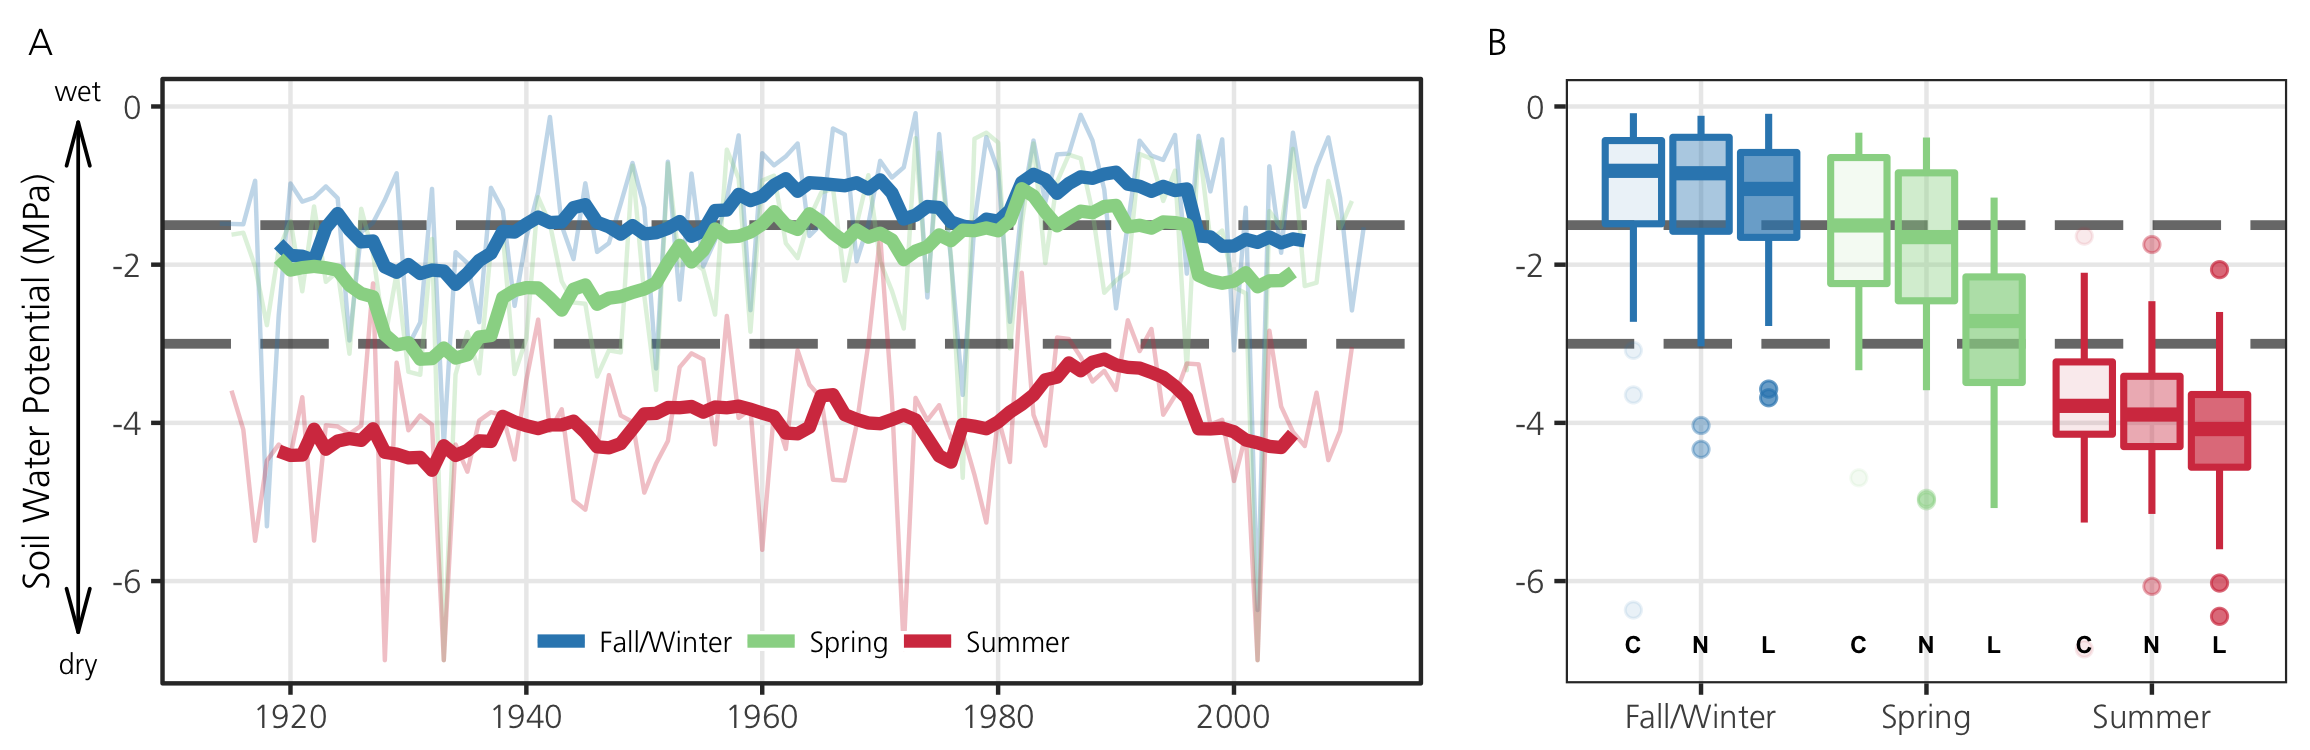 Two part graph. Left: Line graph of soilwater potential by season (1920 to 2000). Seasons are: Fall/Winter, Spring and Summer. Right: Box plot of soilwater potential by season for the current), near future and long-term future.